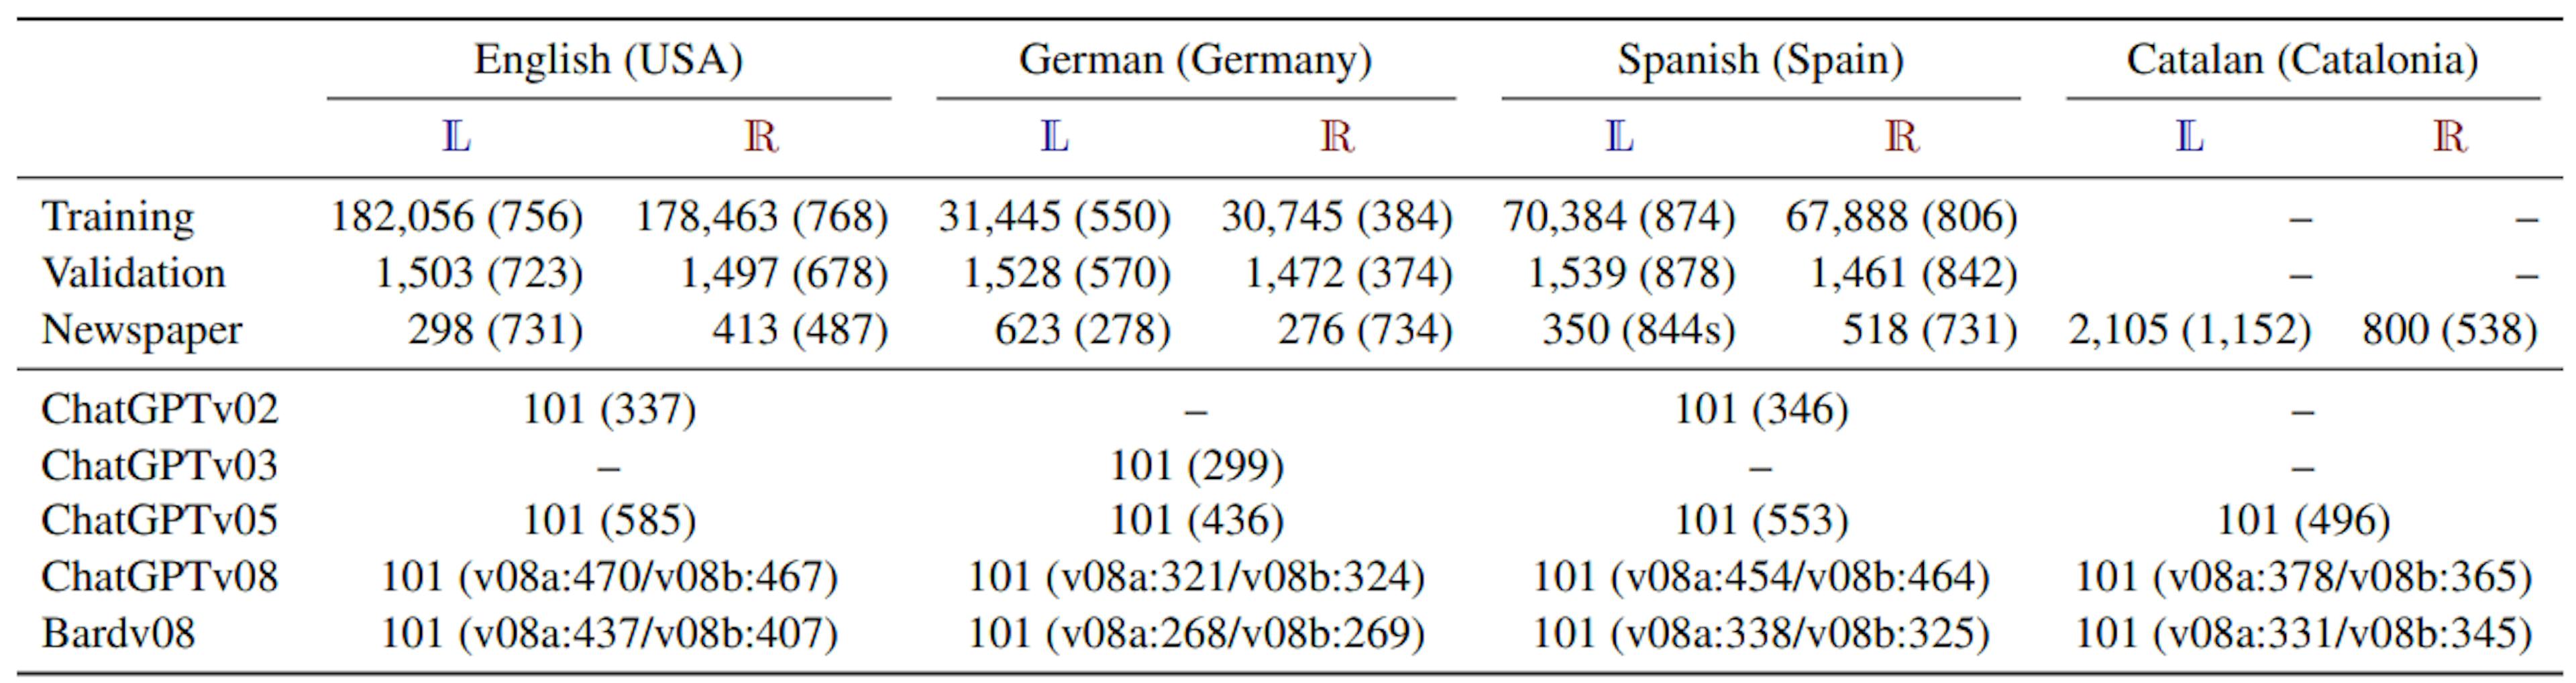 Table 1: Number of articles (average word count in parentheses) divided as articles belonging to a newspaper with a Left (L) and Right orientation (R). For testing, we use newspapers not seen in training or validation: Slate (L) and The National Pulse (R) for USA, My Heimat (L) and die Preußische Allgemeine Zeitung (R) for Germany,